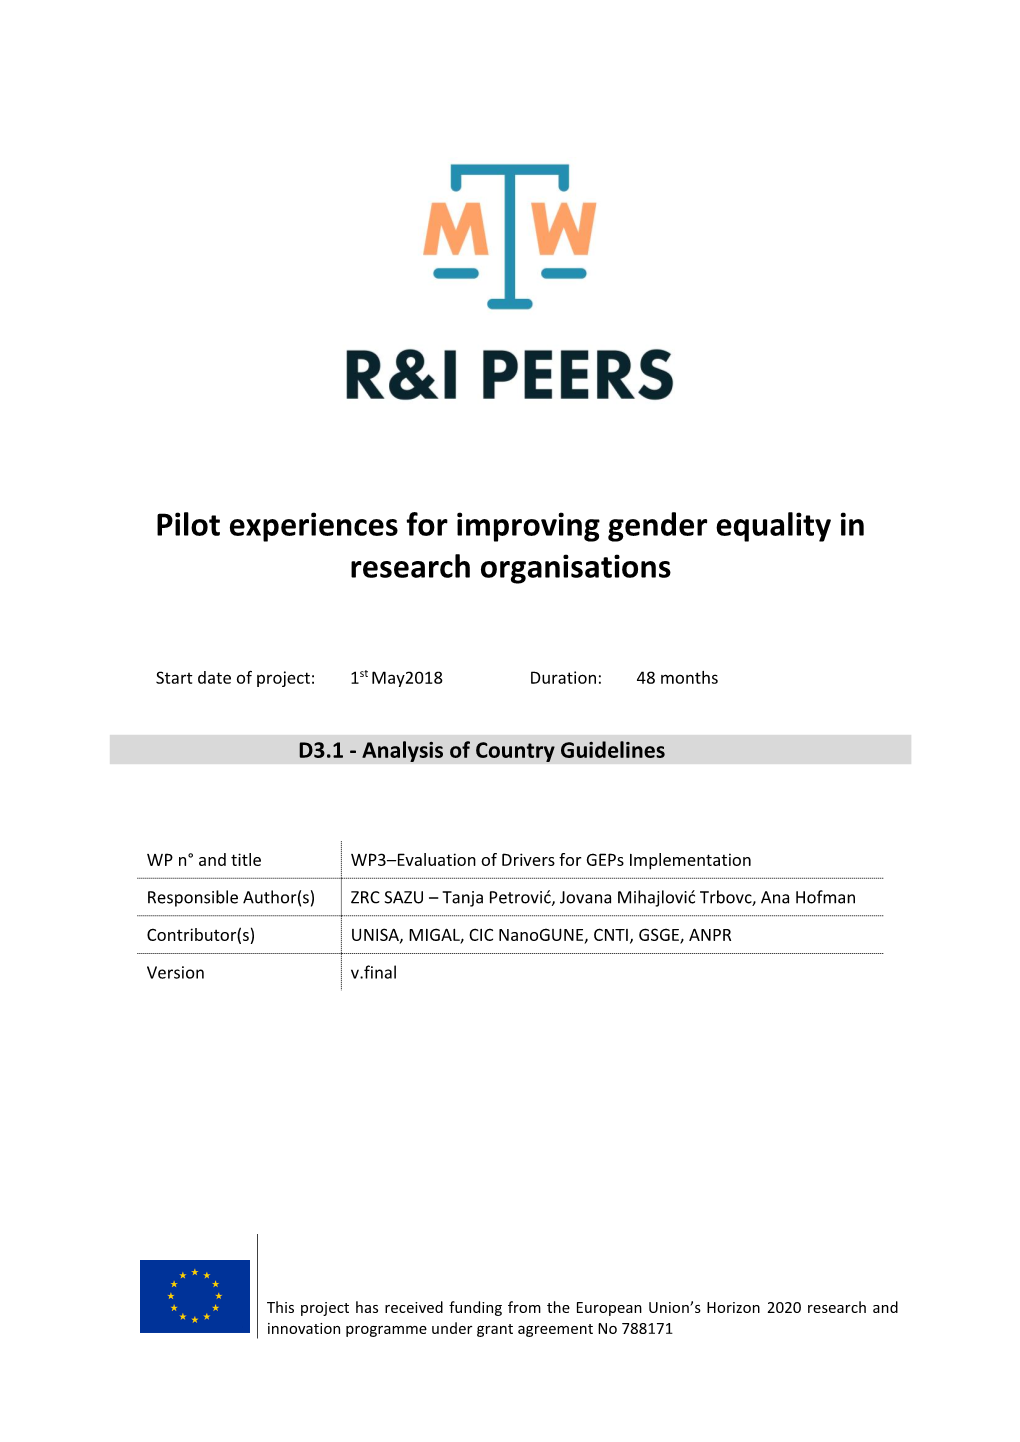 Analysis of Country Guidelines on Gender Equality Plans